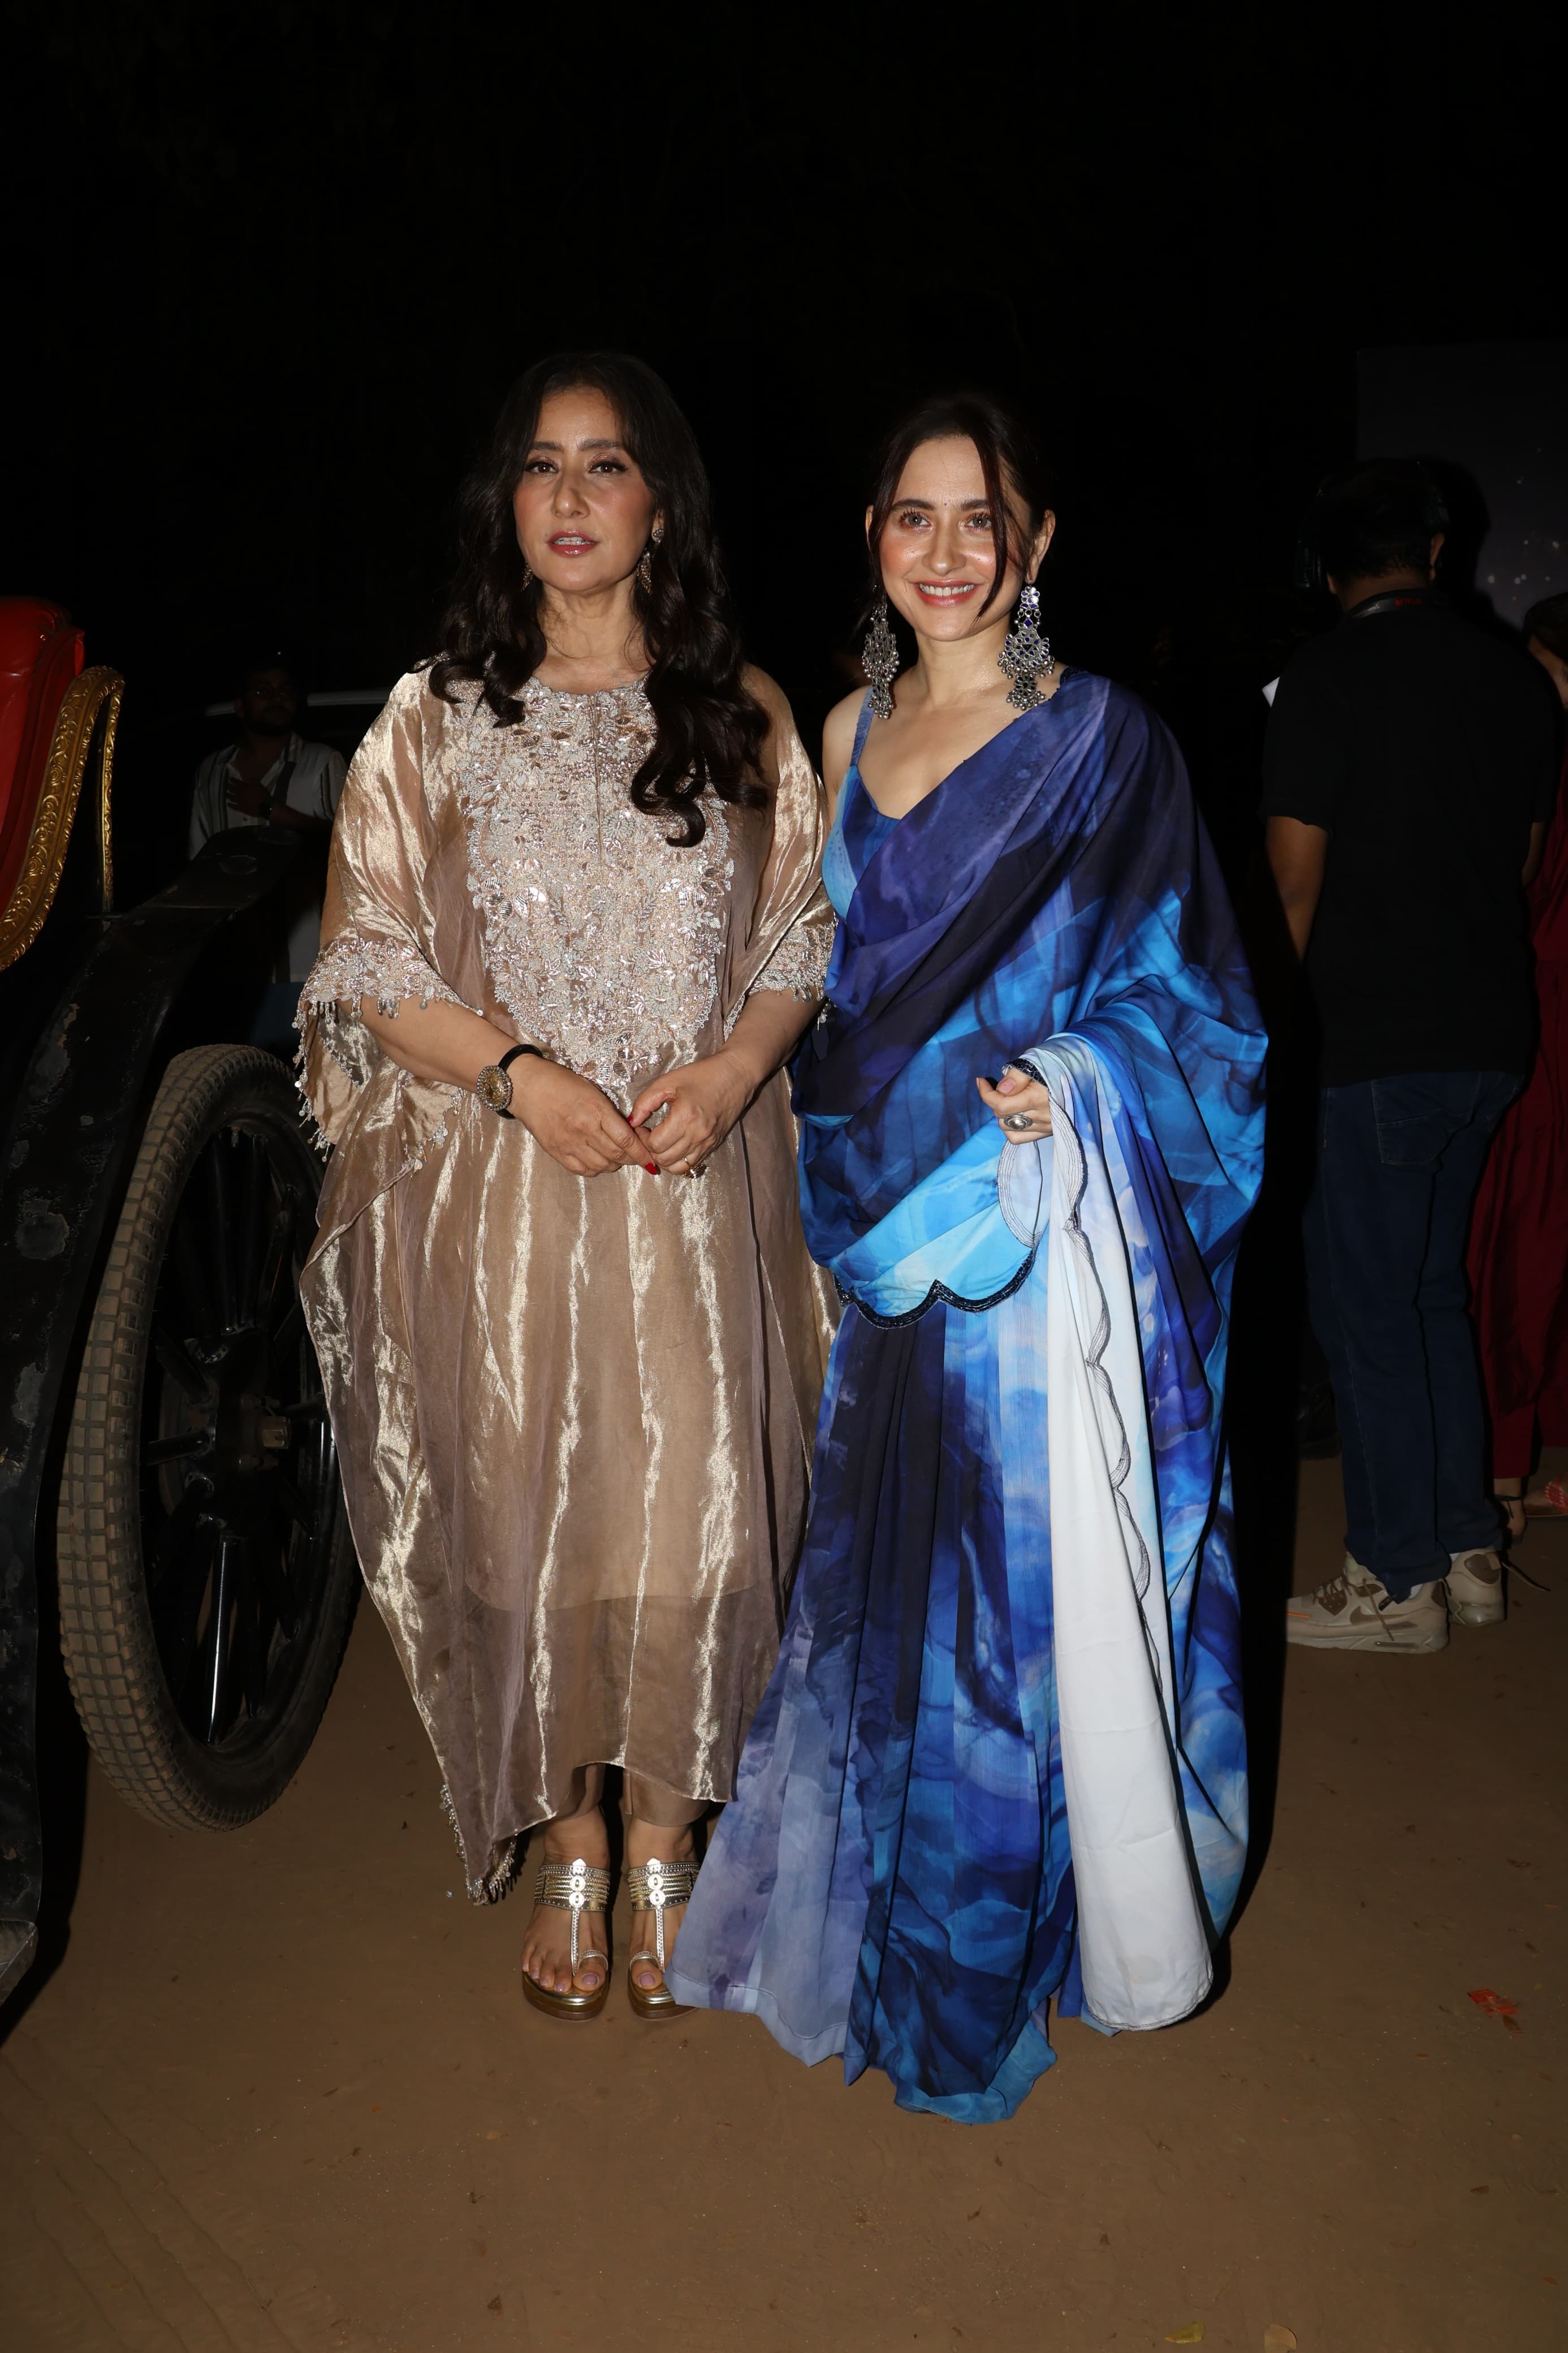 Manisha Koirala and Sanjeeda Sheikh posed for paparazzi as they attended the Heeramandi release date announcement event